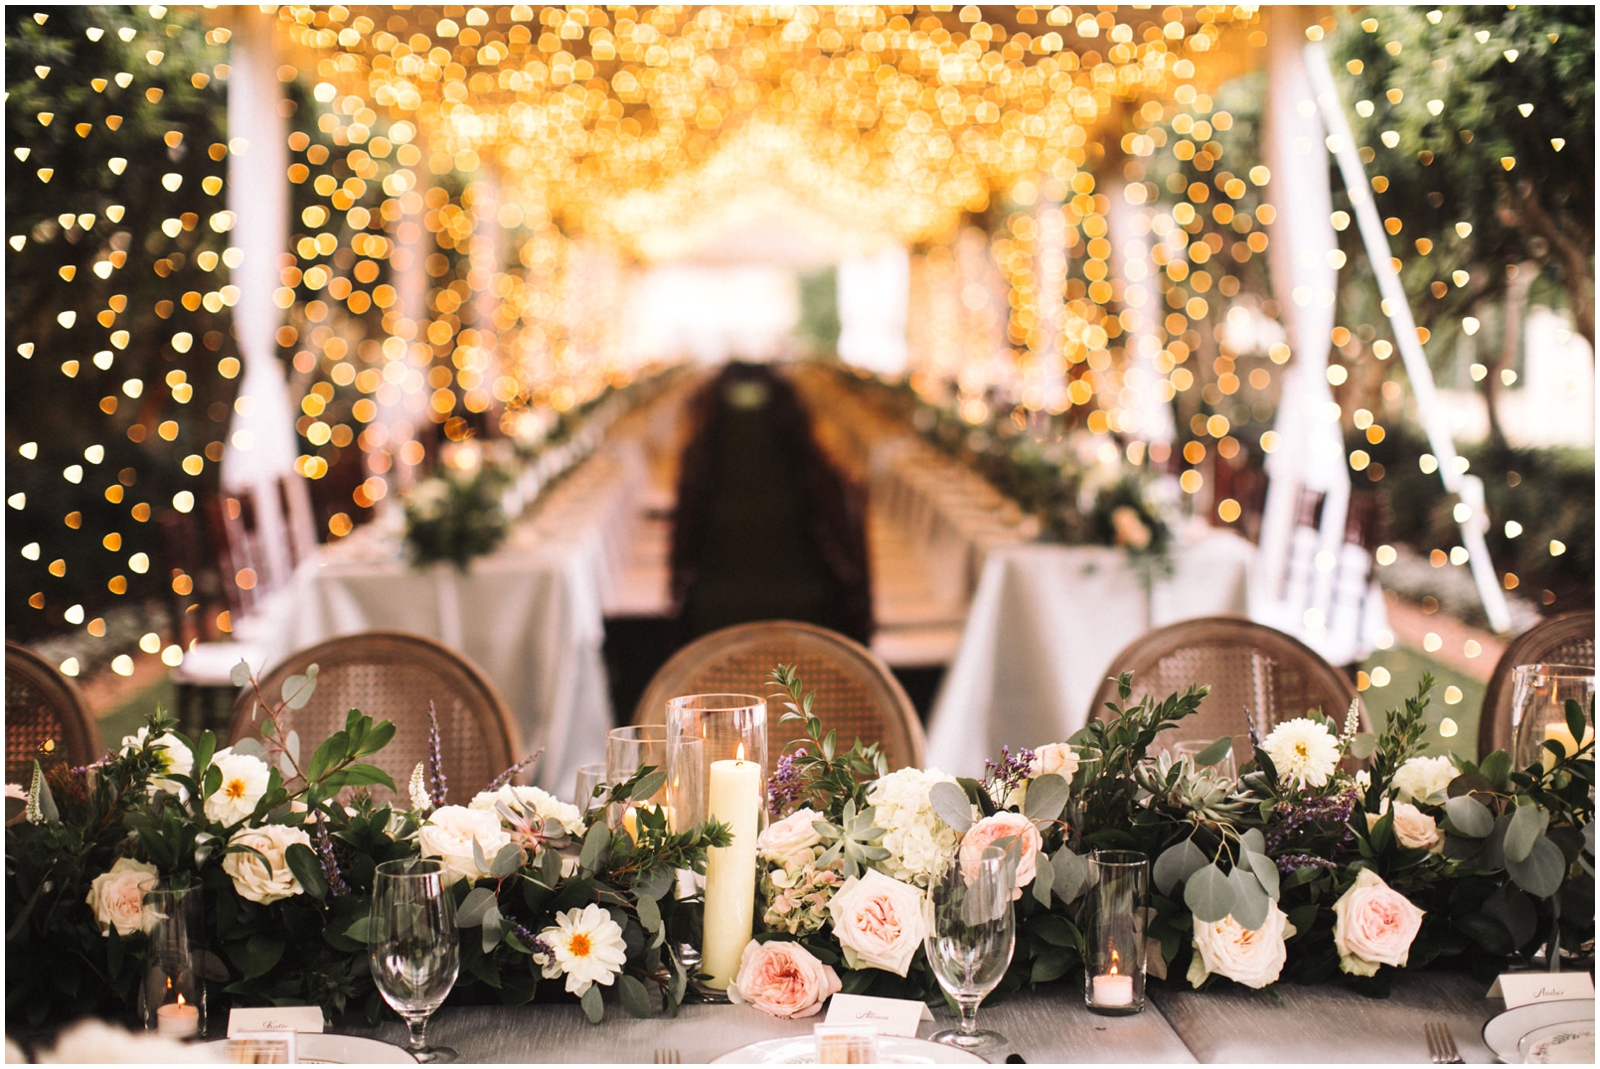  Floral decor on chairs 